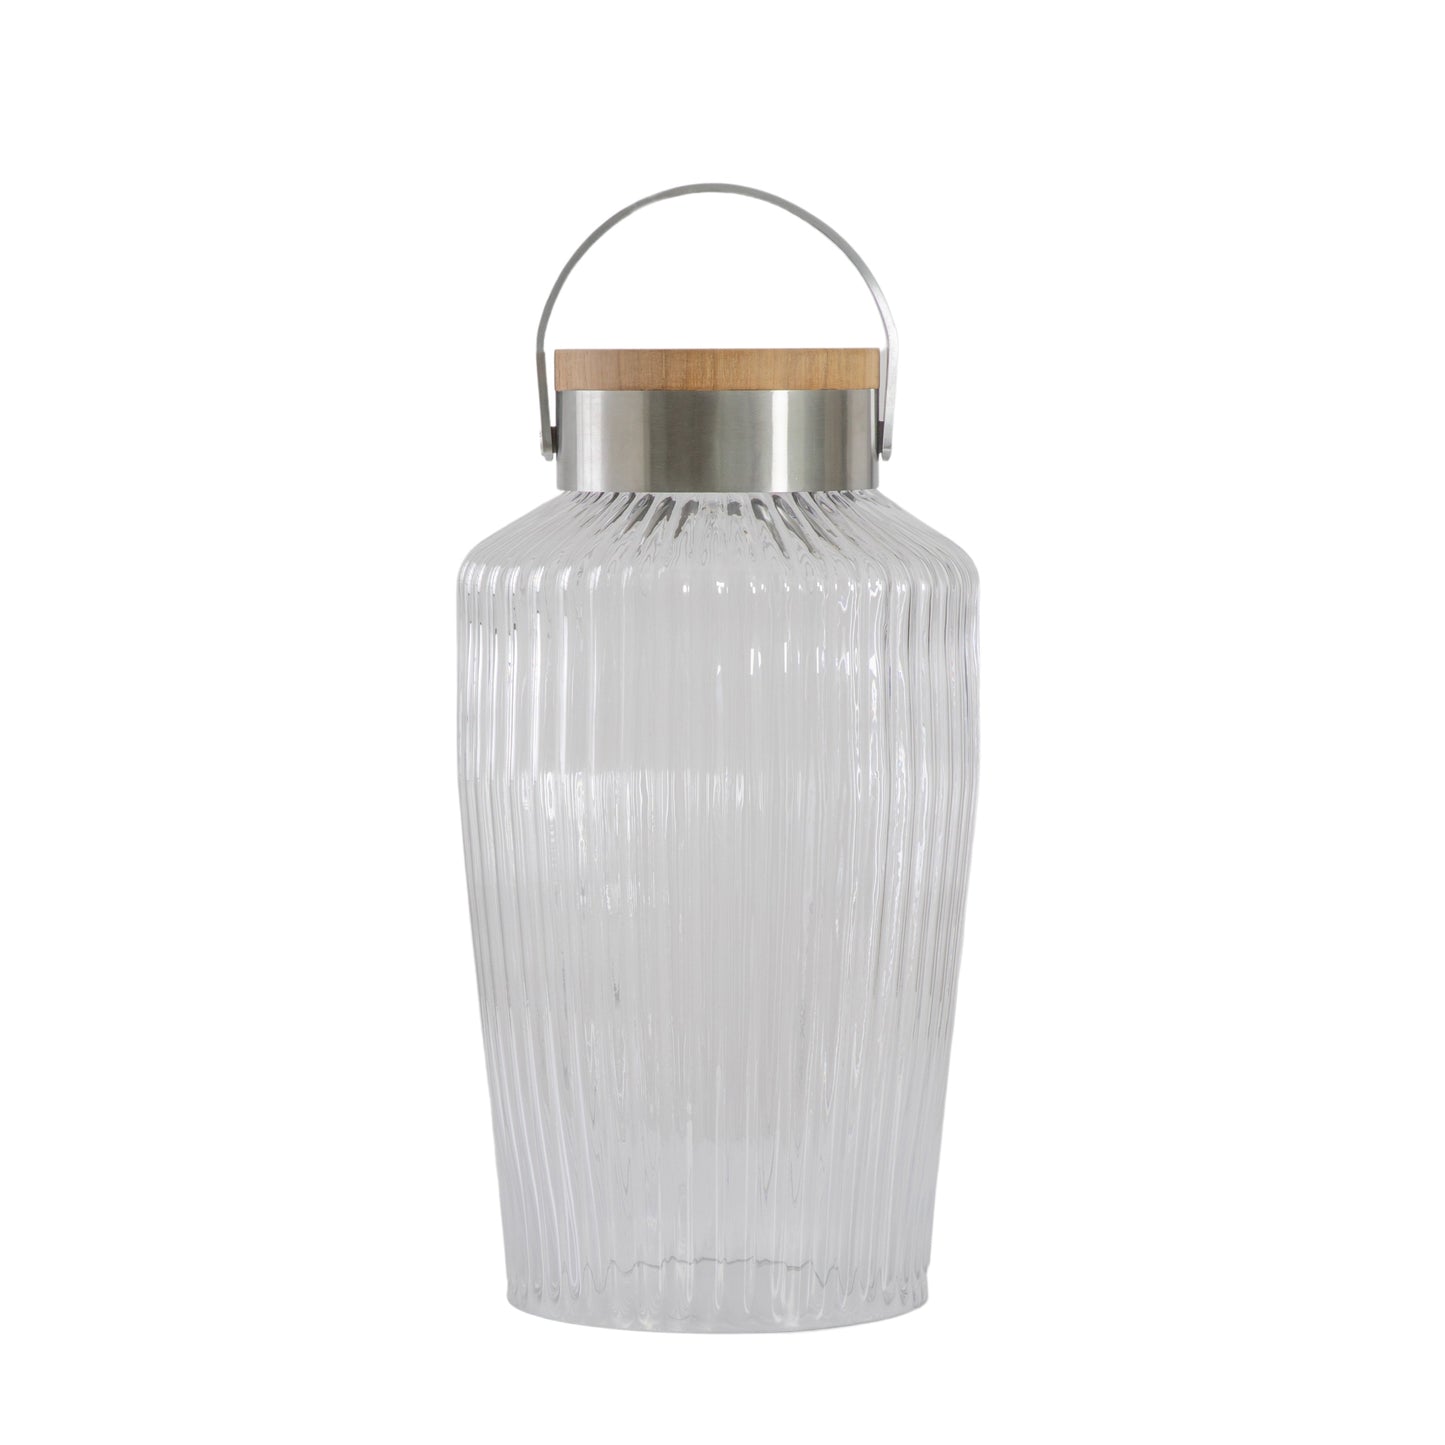 An Averton LED Solar Lantern Large with a wooden handle for interior decor from Kikiathome.co.uk.